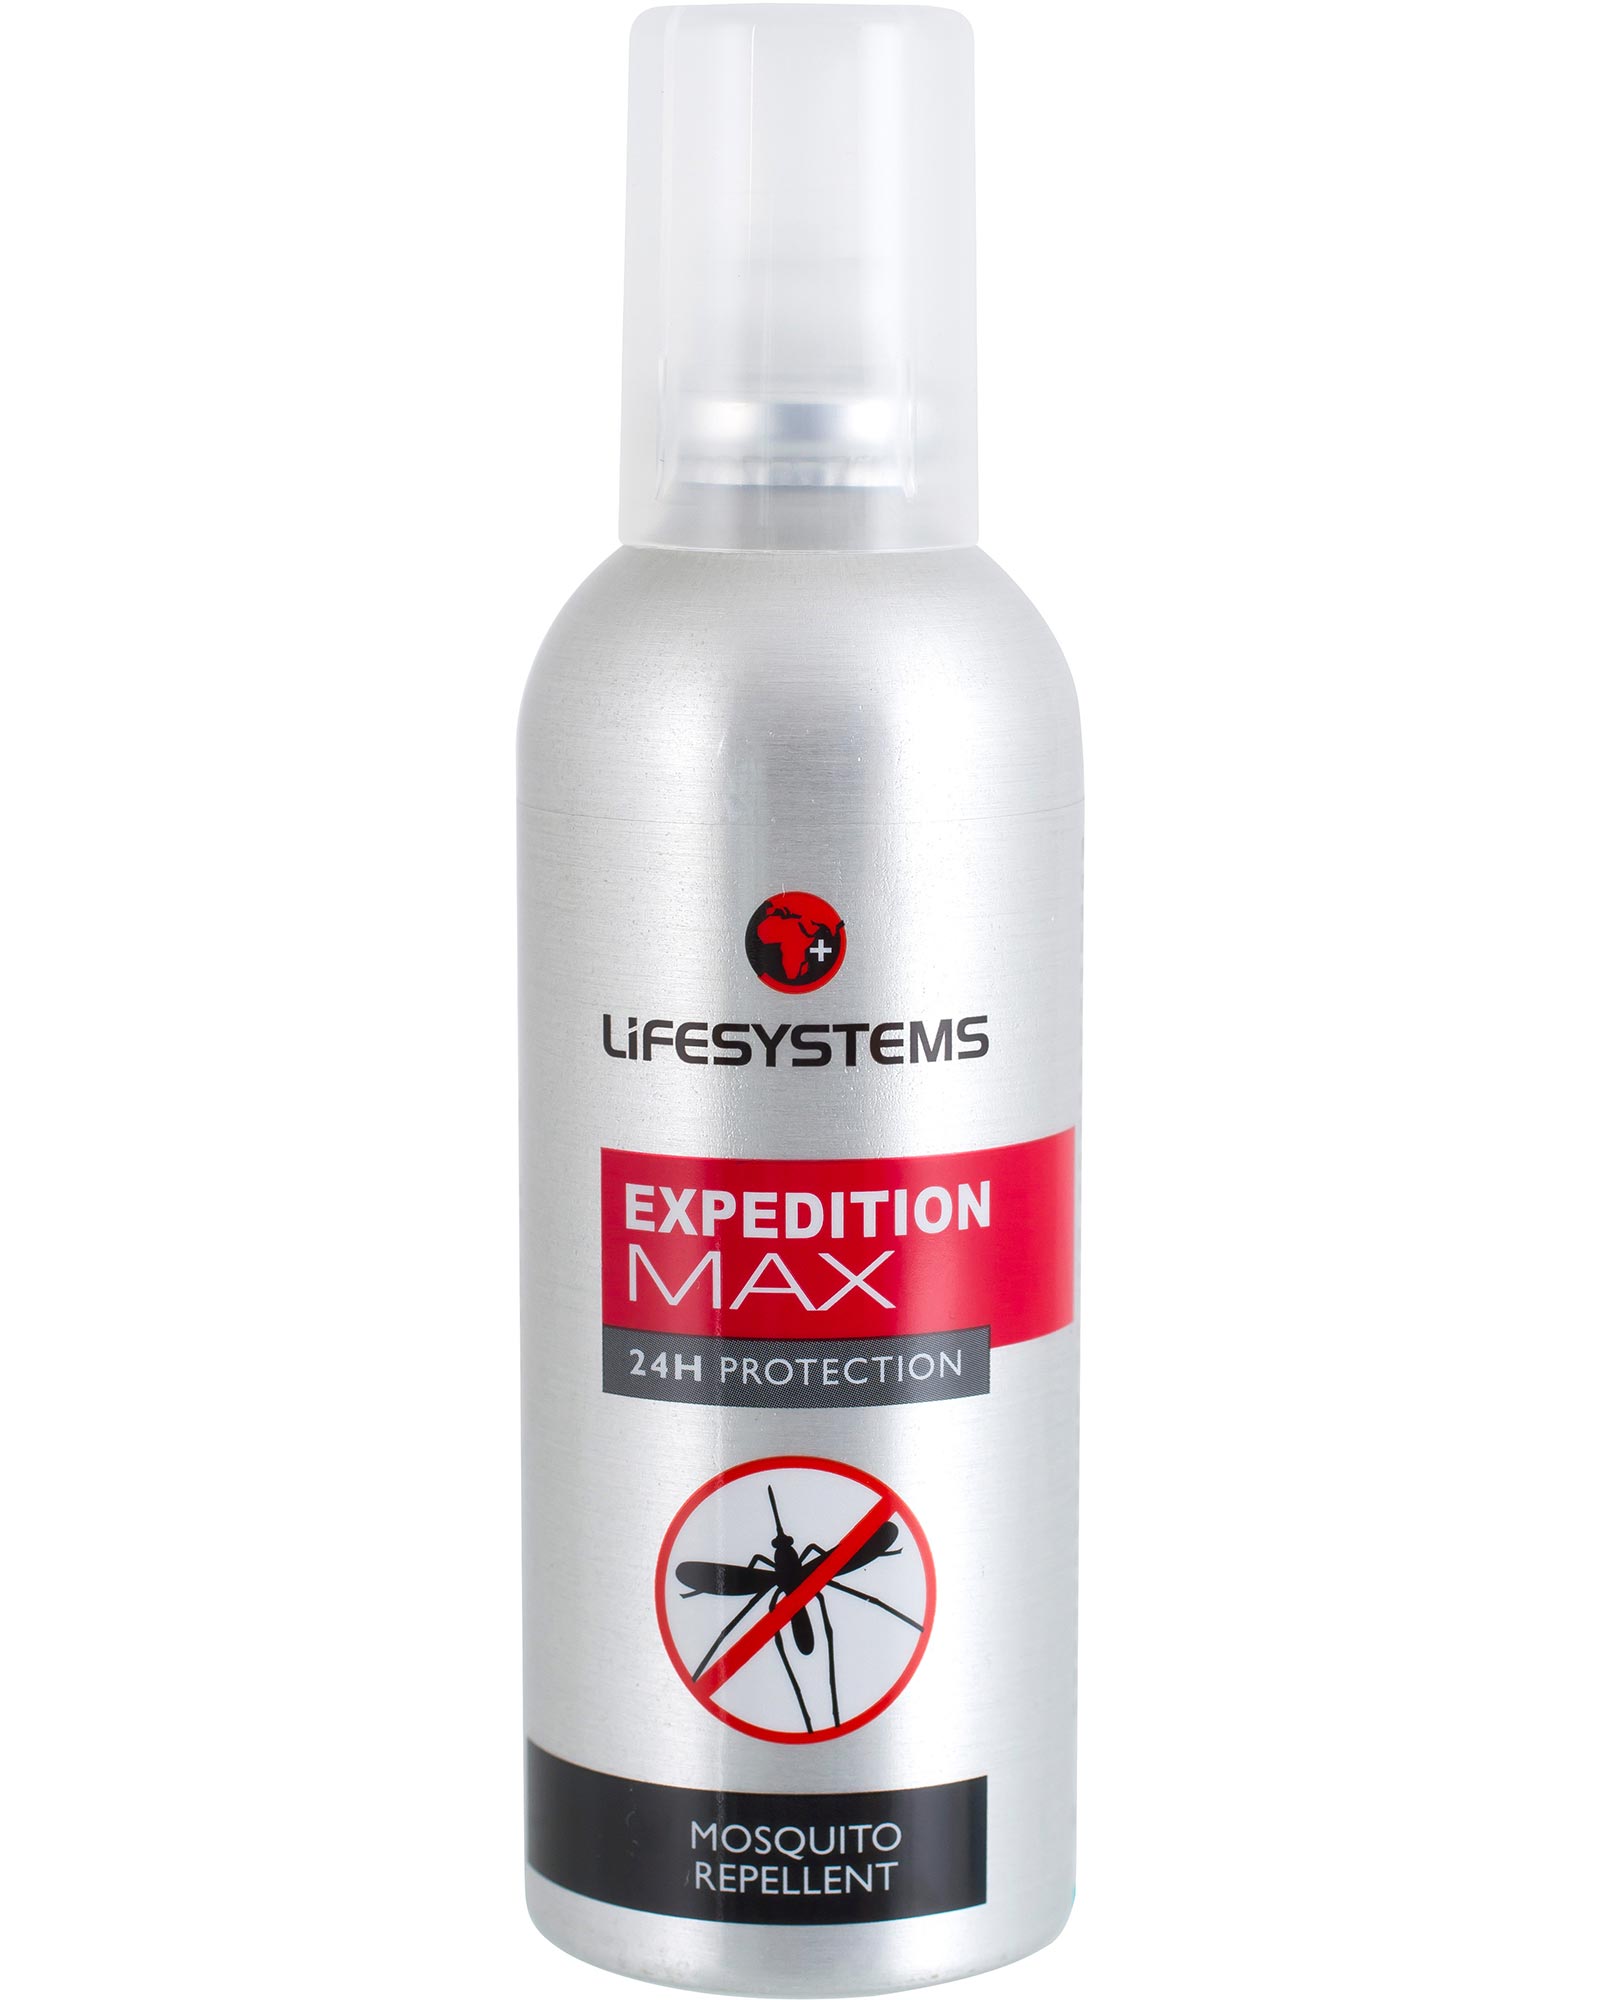 Lifesystems Expedition Max 100ml Insect Repellent